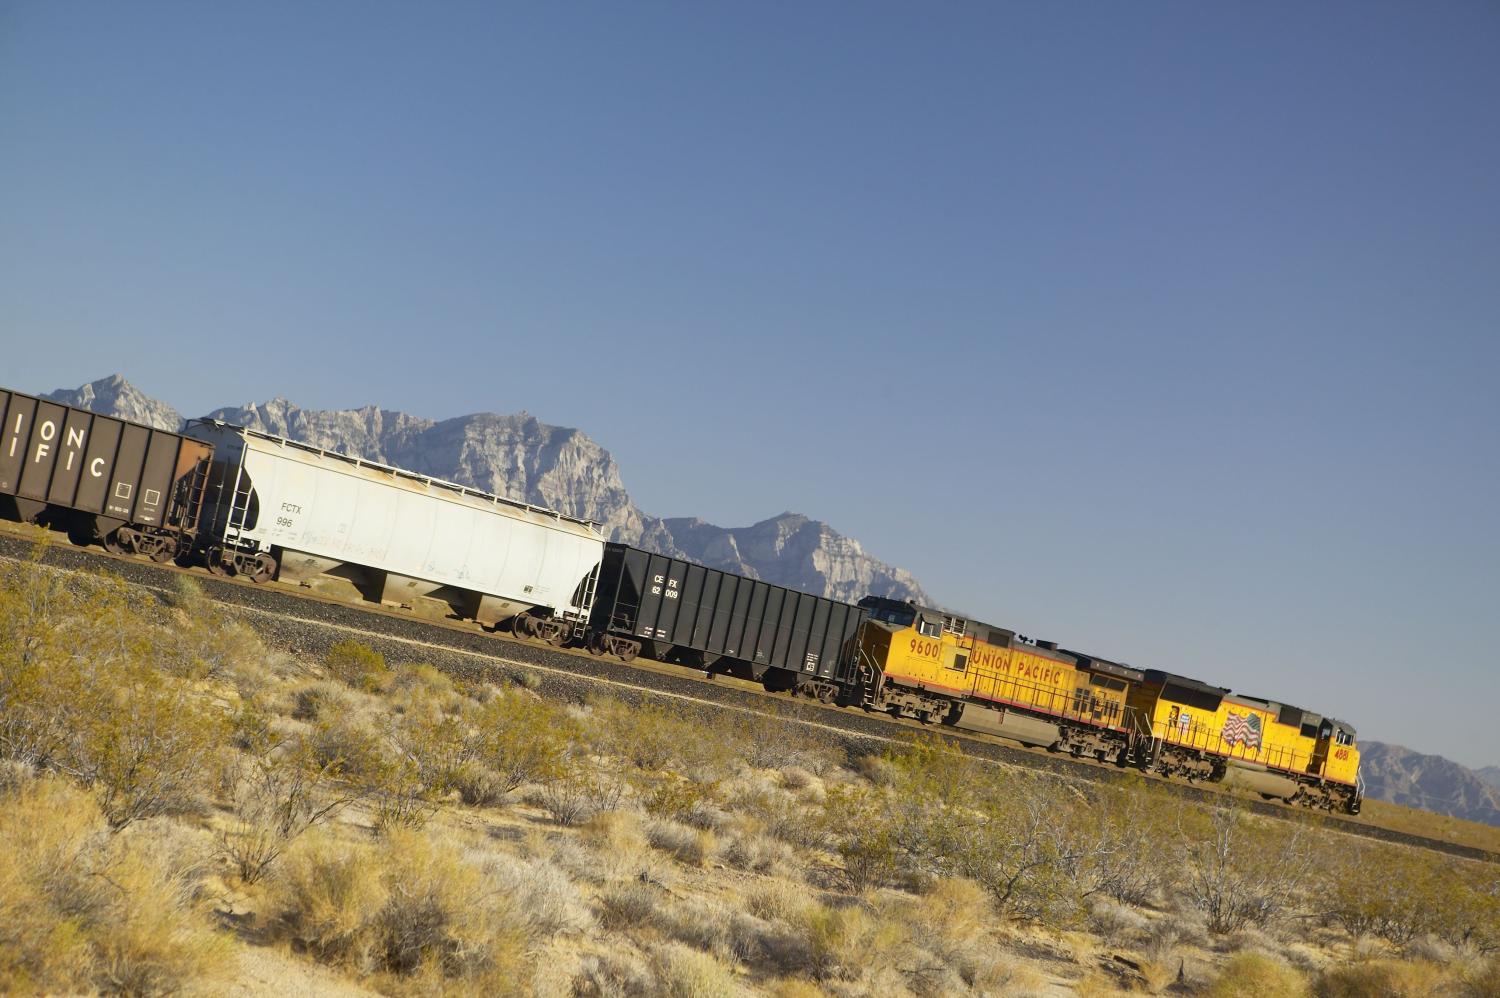 Freight train travels through desert and mountainous areas of Mojave Desert in Southern California